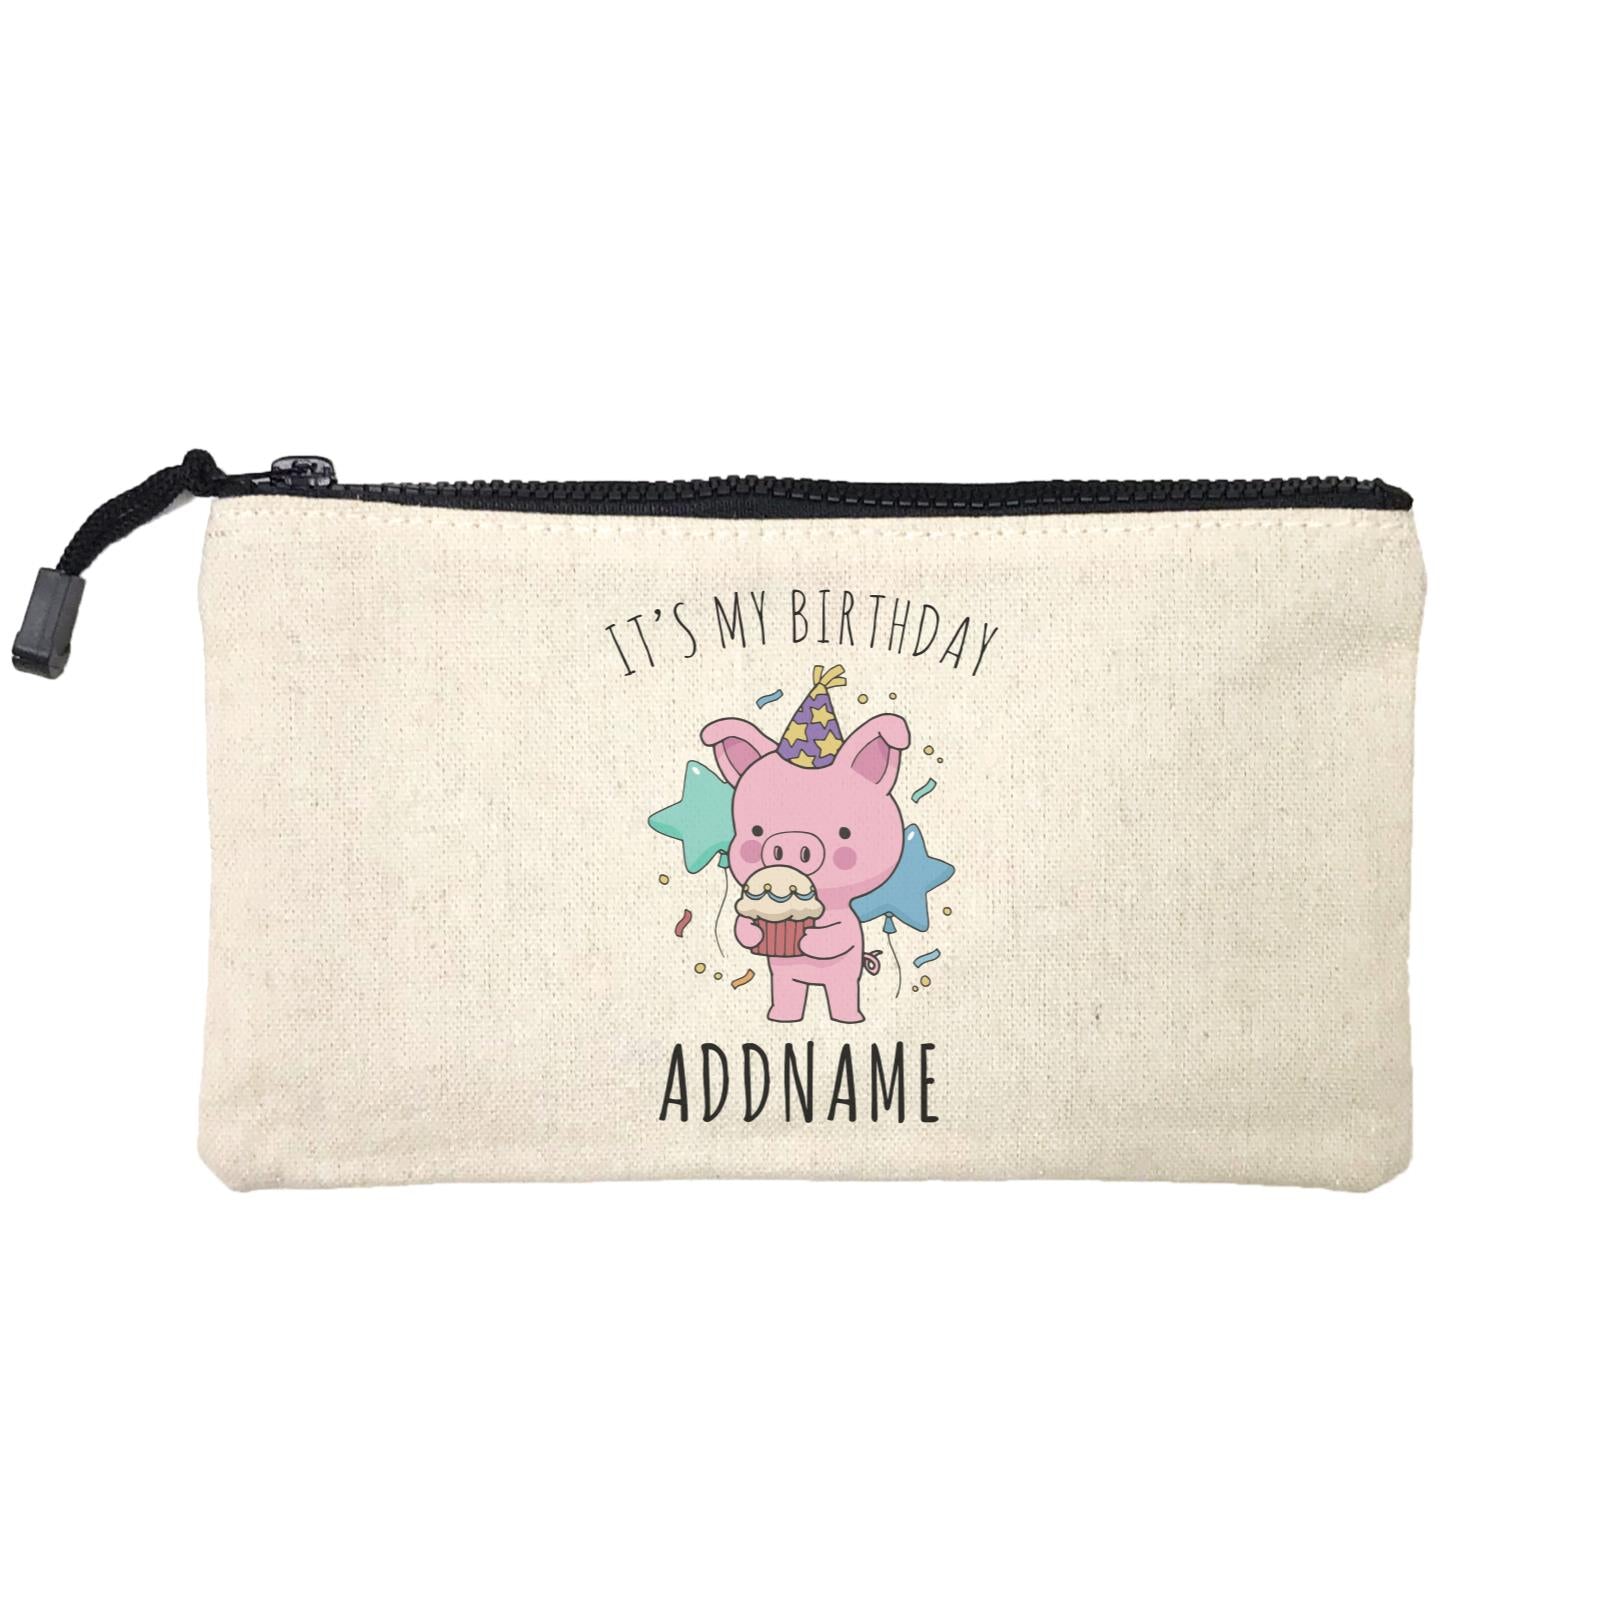 Birthday Sketch Animals Pig with Party Hat Eating Cupcake It's My Birthday Addname Mini Accessories Stationery Pouch